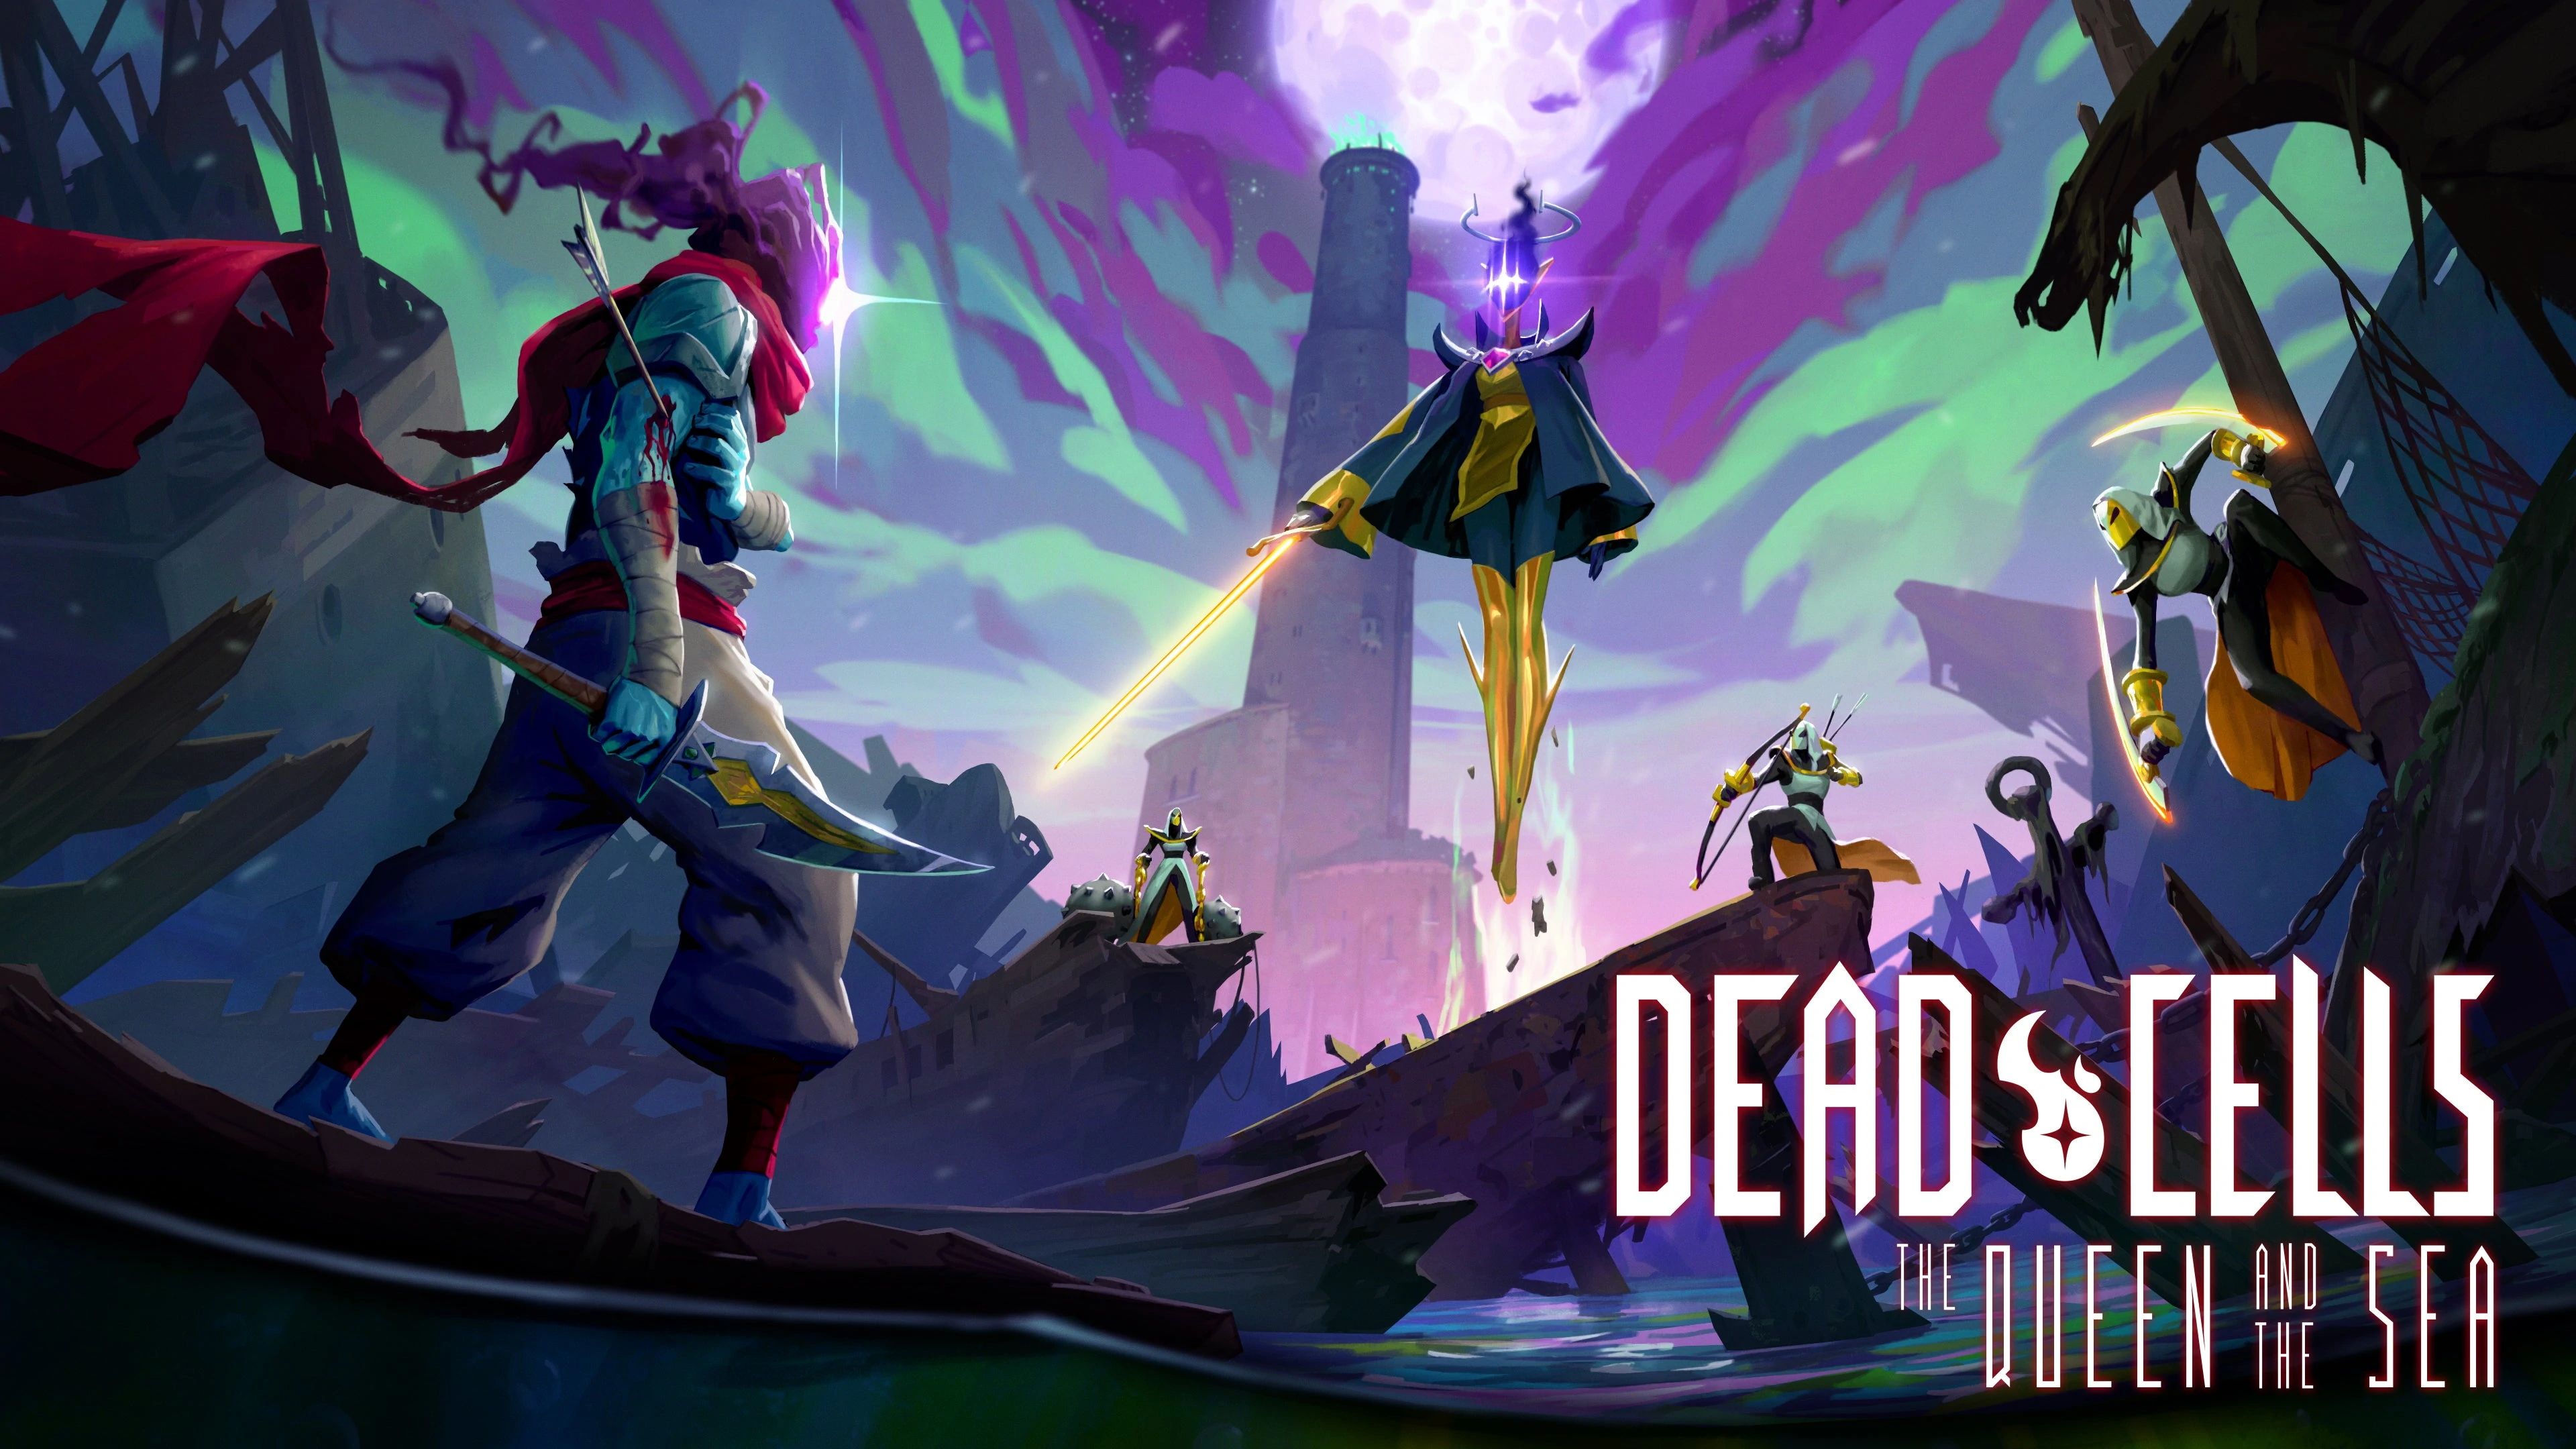 Dead Cells The Queen and the Sea DLC release hero